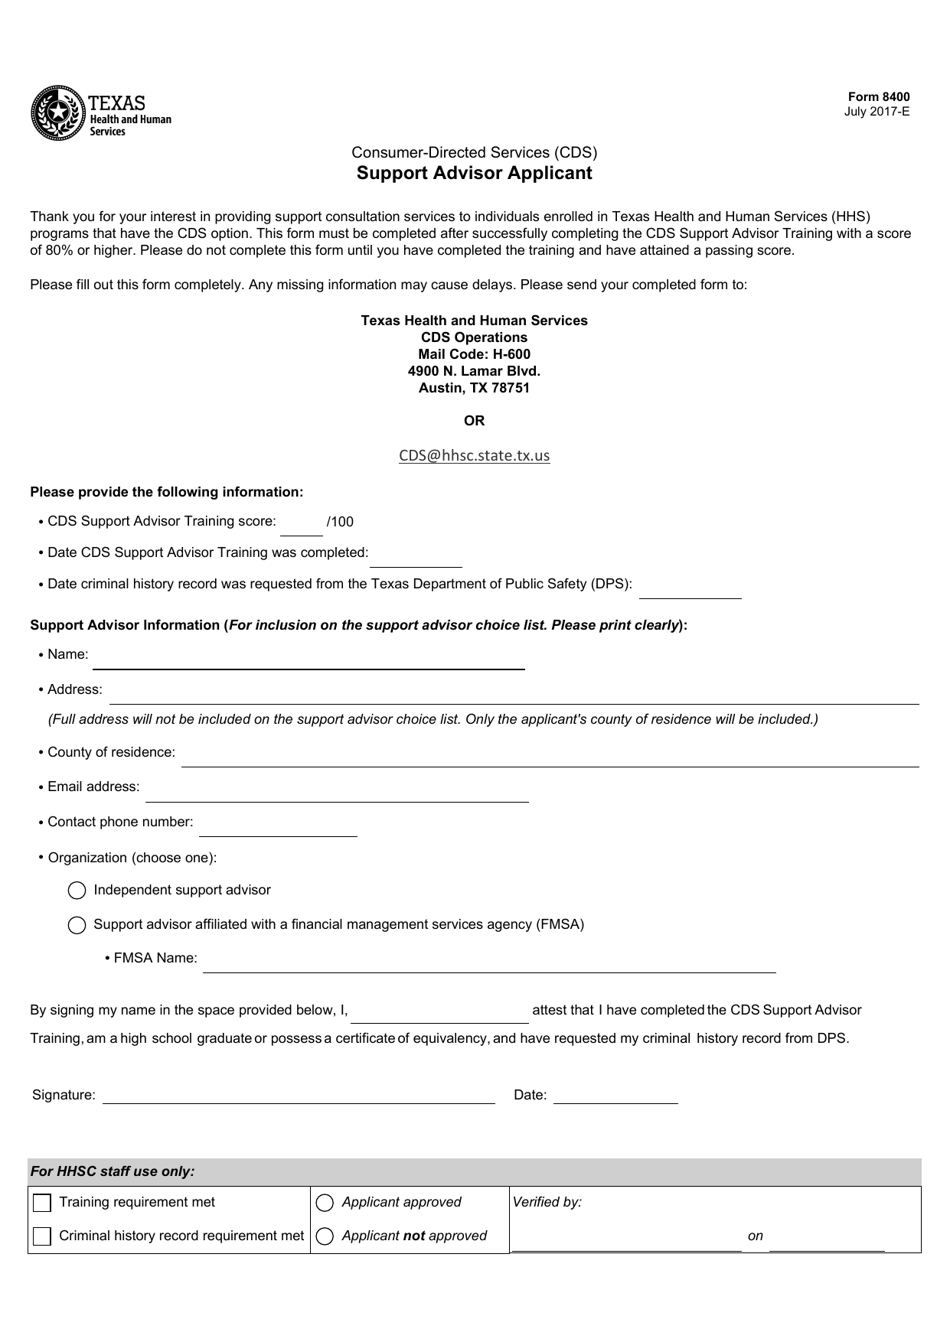 Form 8400 Consumer-Directed Services (Cds) Support Advisor Applicant - Texas, Page 1